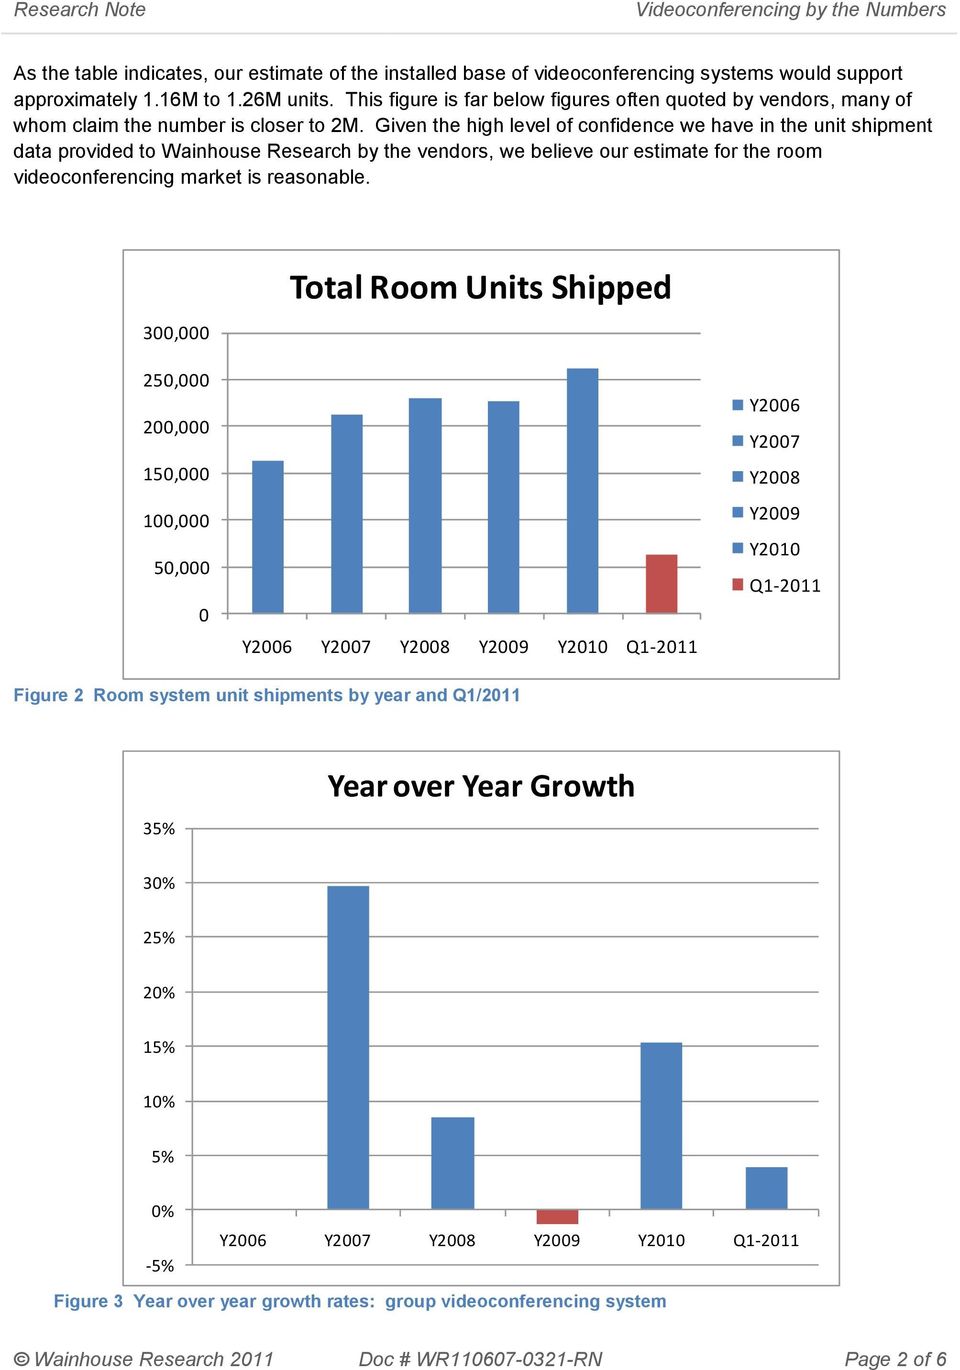 Given the high level of confidence we have in the unit shipment data provided to Wainhouse Research by the vendors, we believe our estimate for the room videoconferencing market is reasonable.